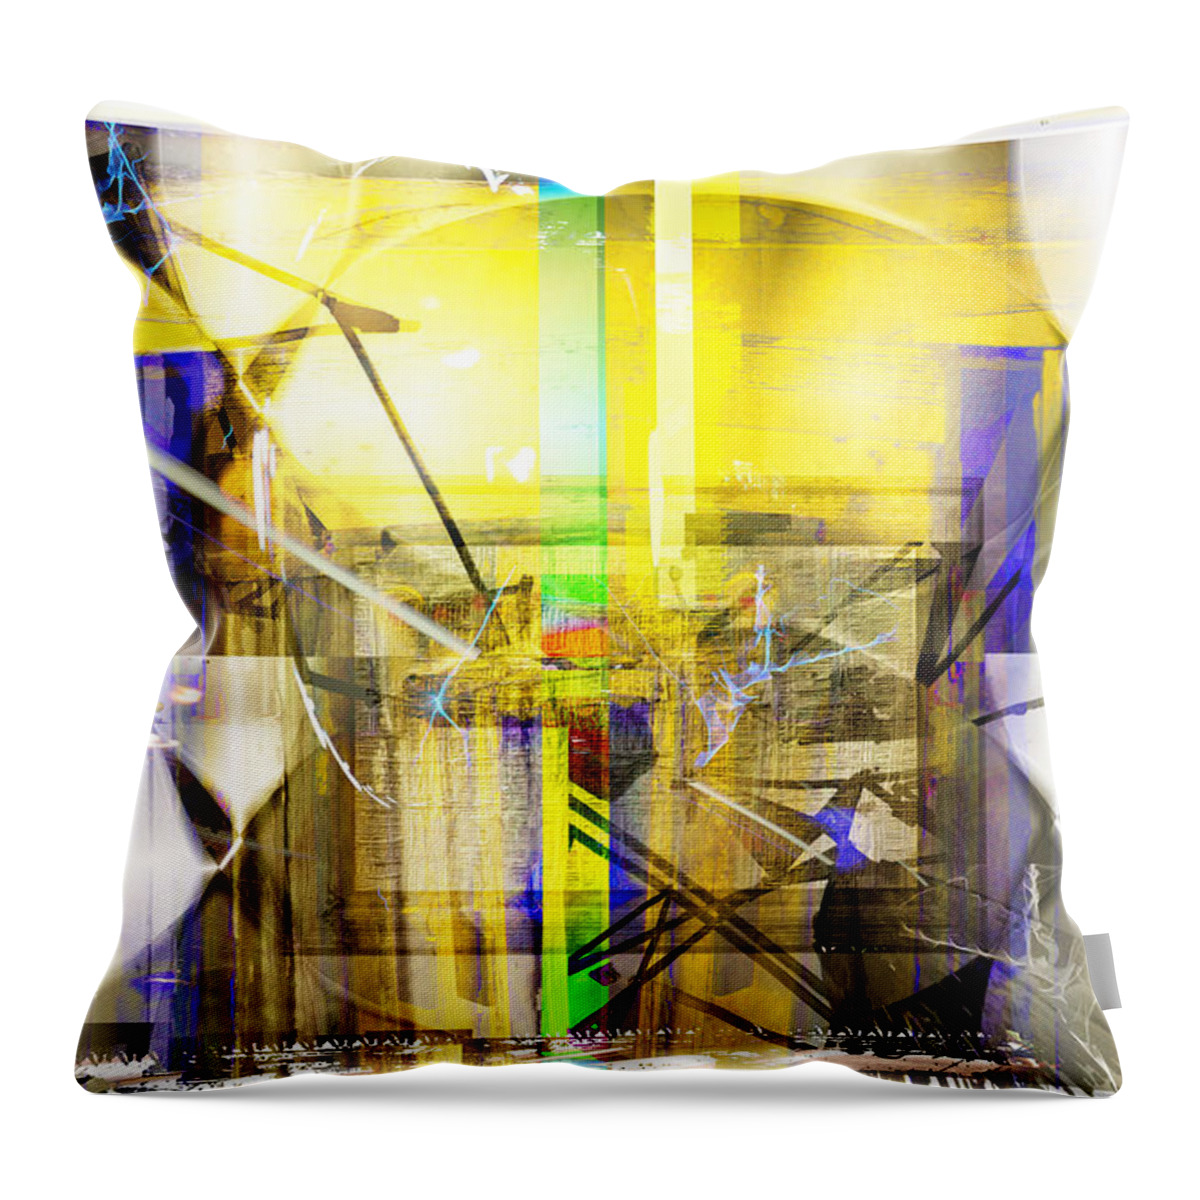 Abstract Throw Pillow featuring the digital art Vibrational Energy by Art Di